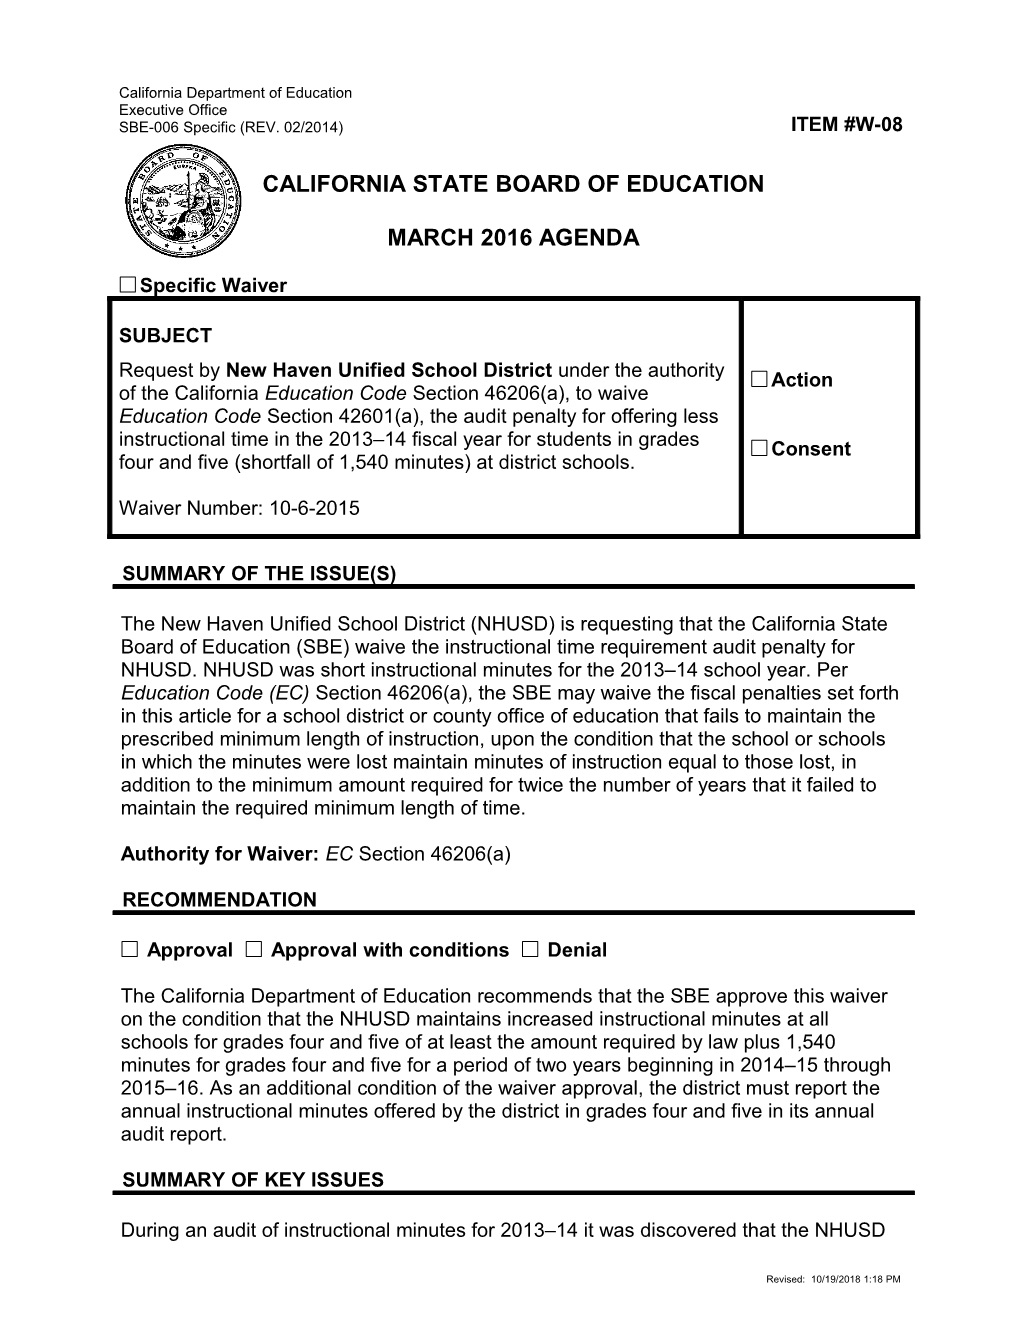 March 2016 Waiver Item W-08 - Meeting Agendas (CA State Board of Education)